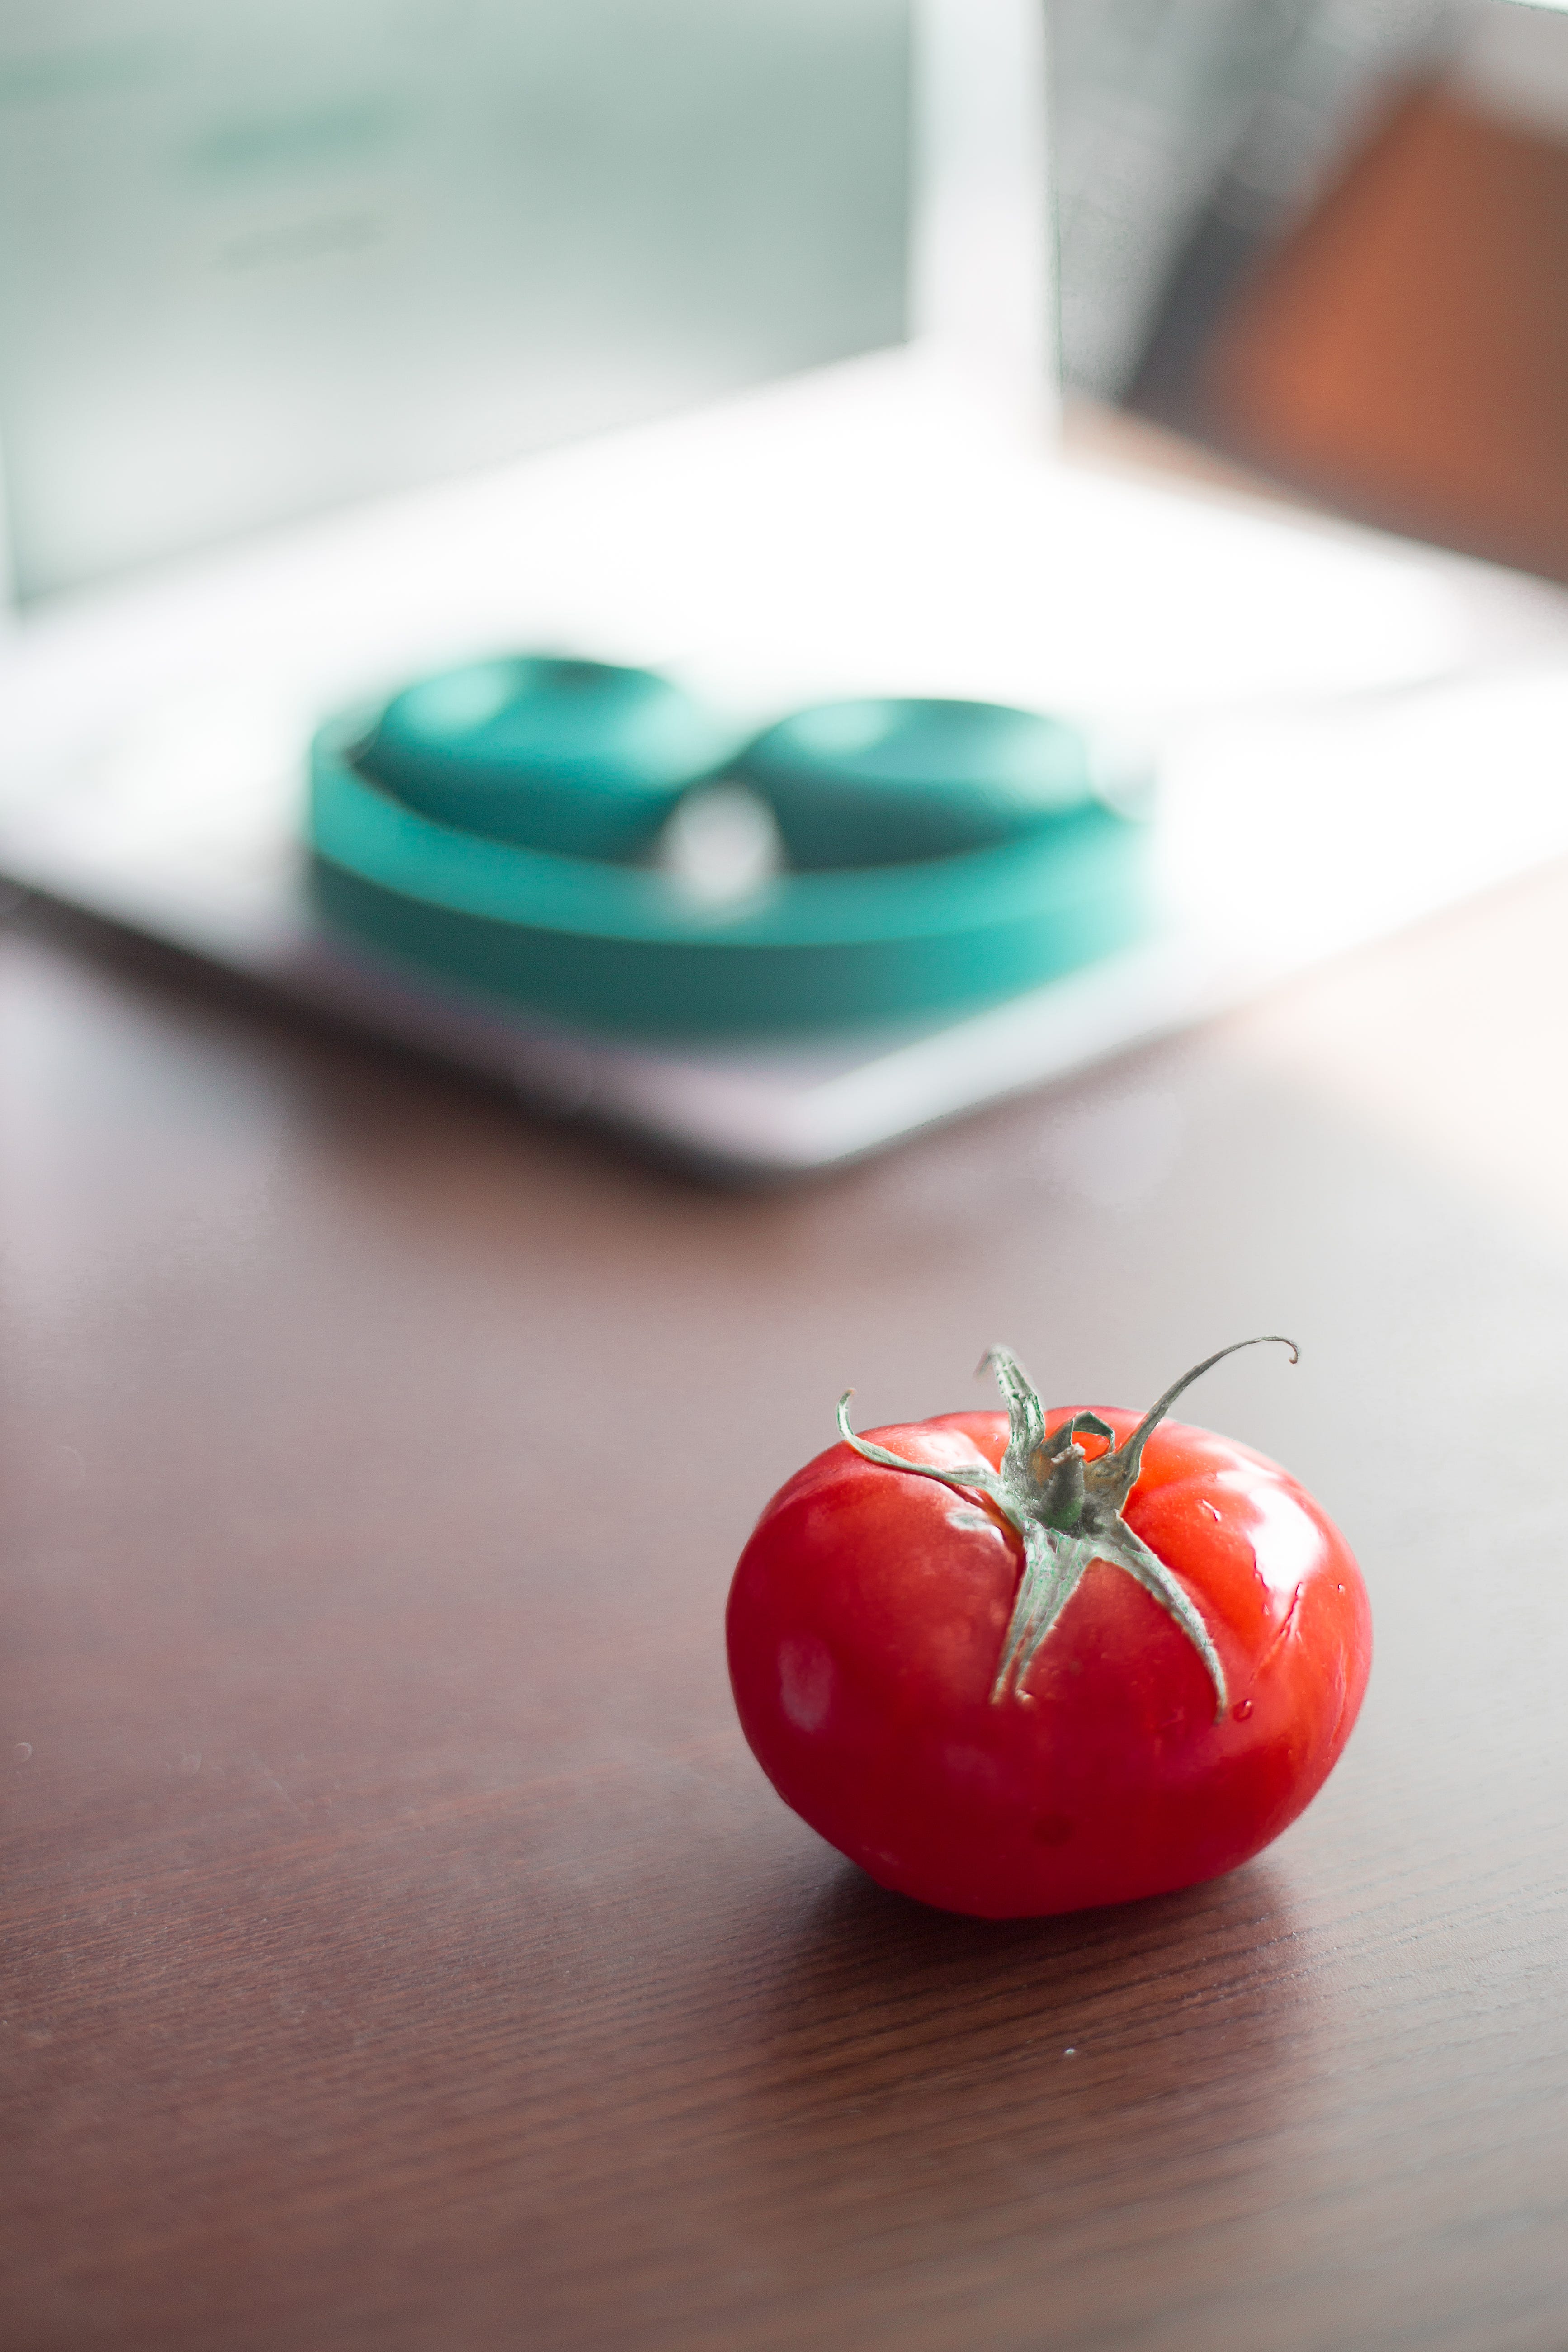 Build a Simple Pomodoro Web App. A beginner's guide | by ...